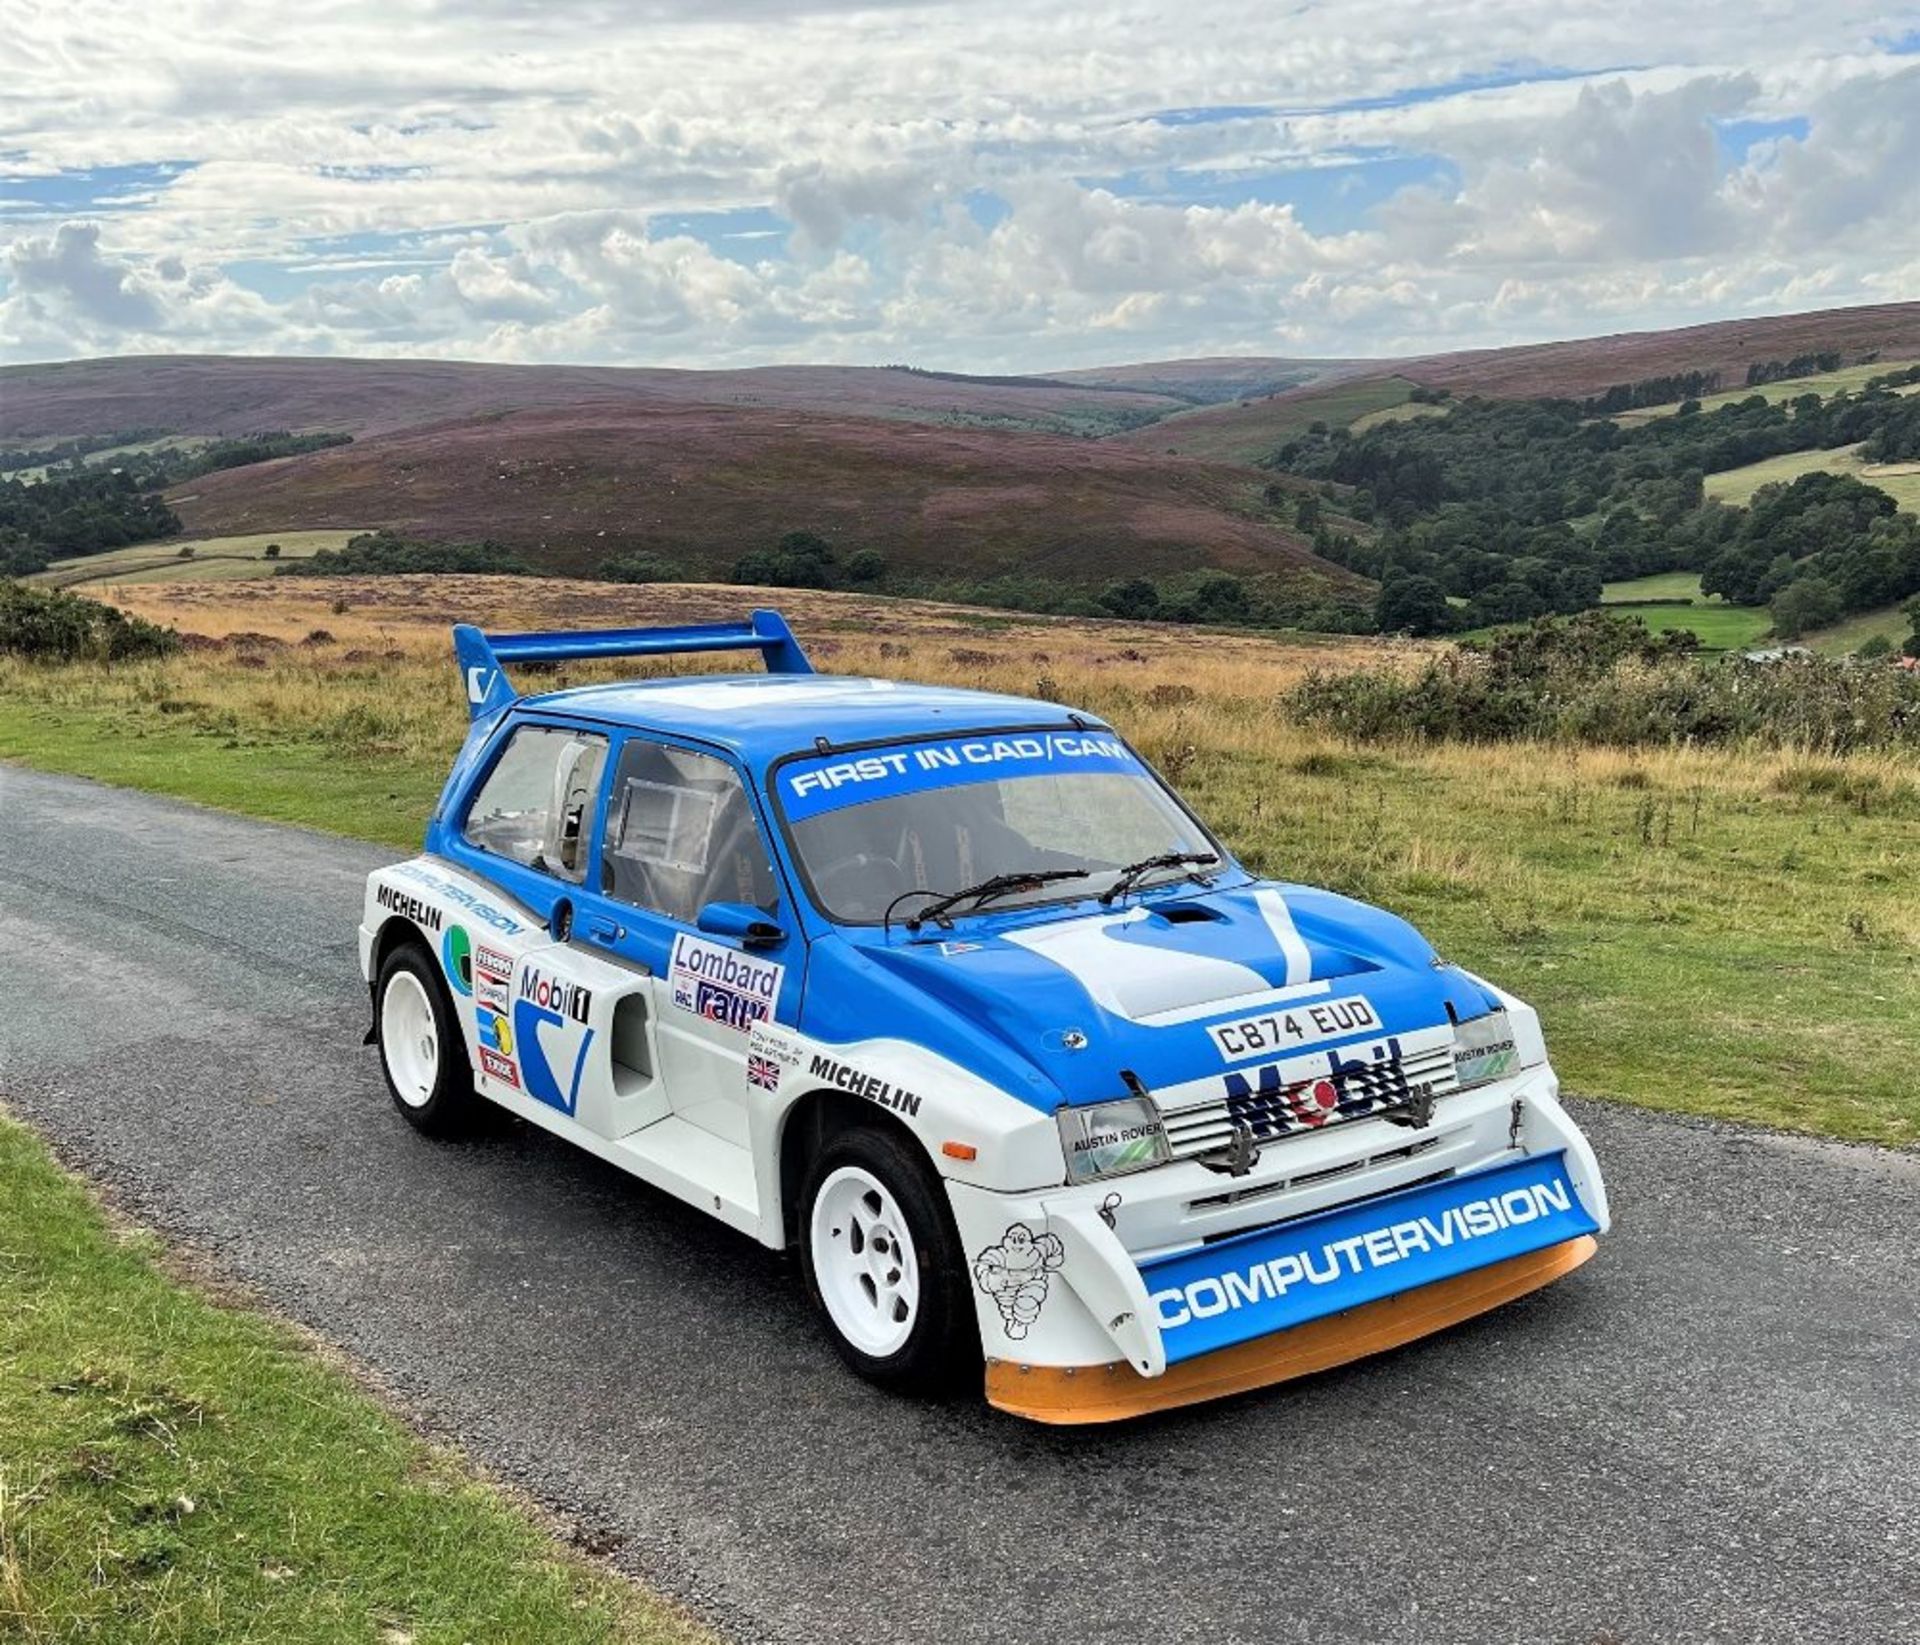 1985 MG Metro 6R4 Works Rally Car Registration Number: C874 EUD Chassis Number: #134  The MG Metro - Image 2 of 31